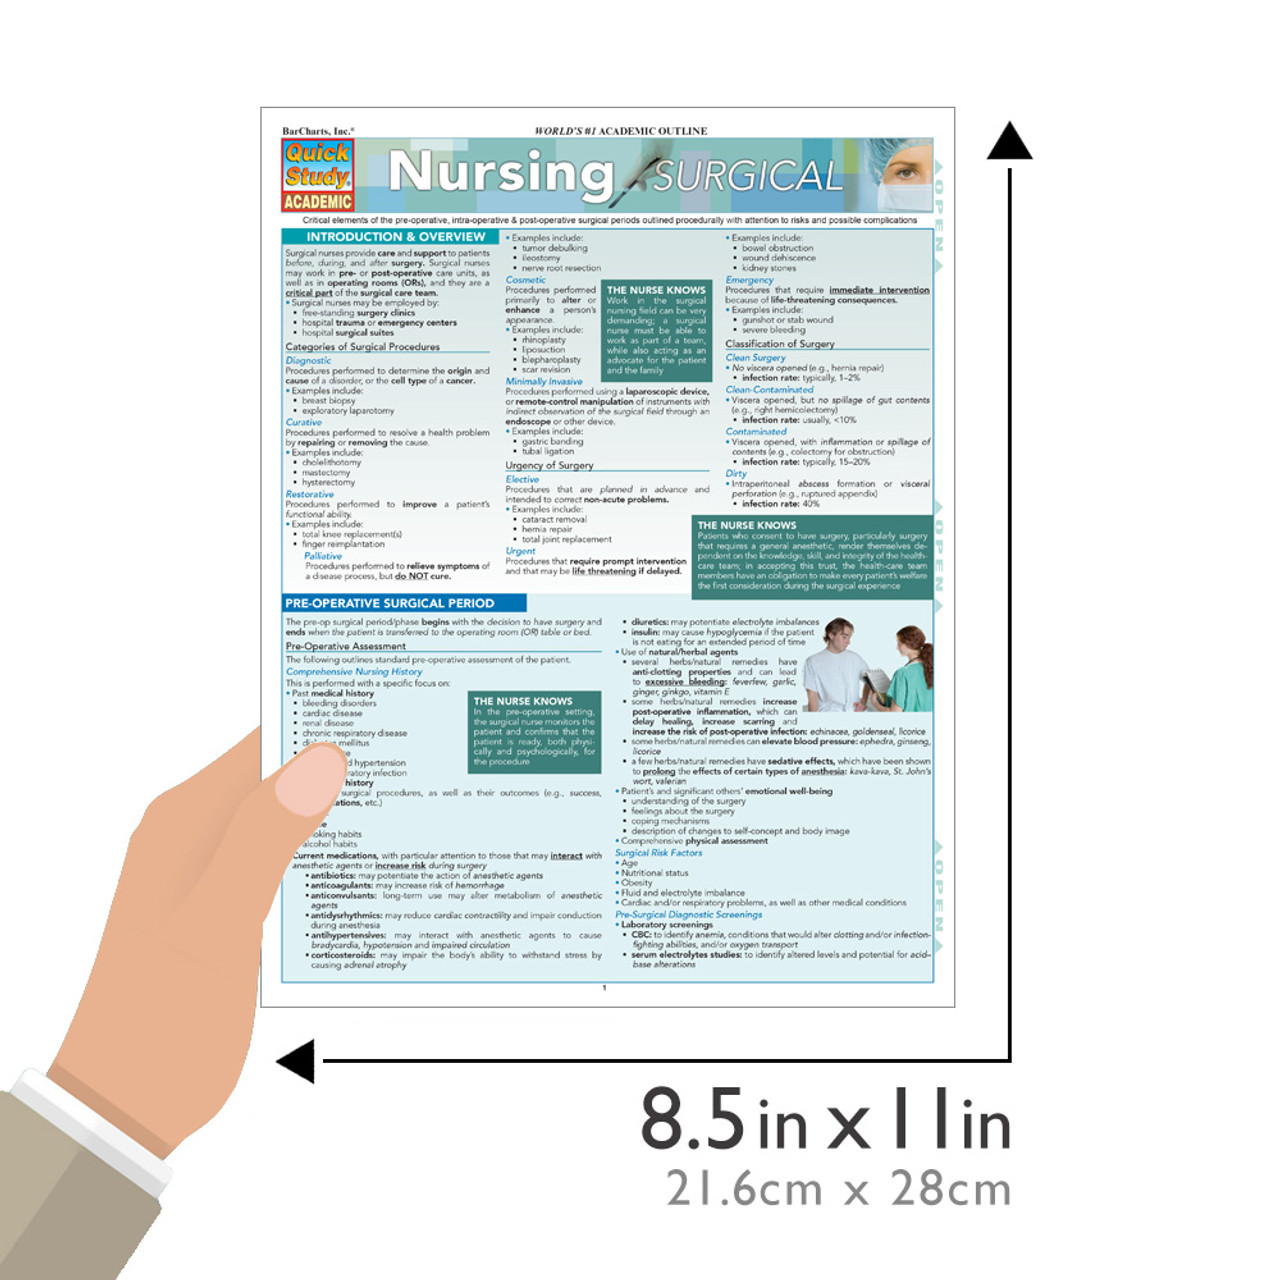 Nursing:　QuickStudy　Surgical　Laminated　Study　Guide　(9781423214342)